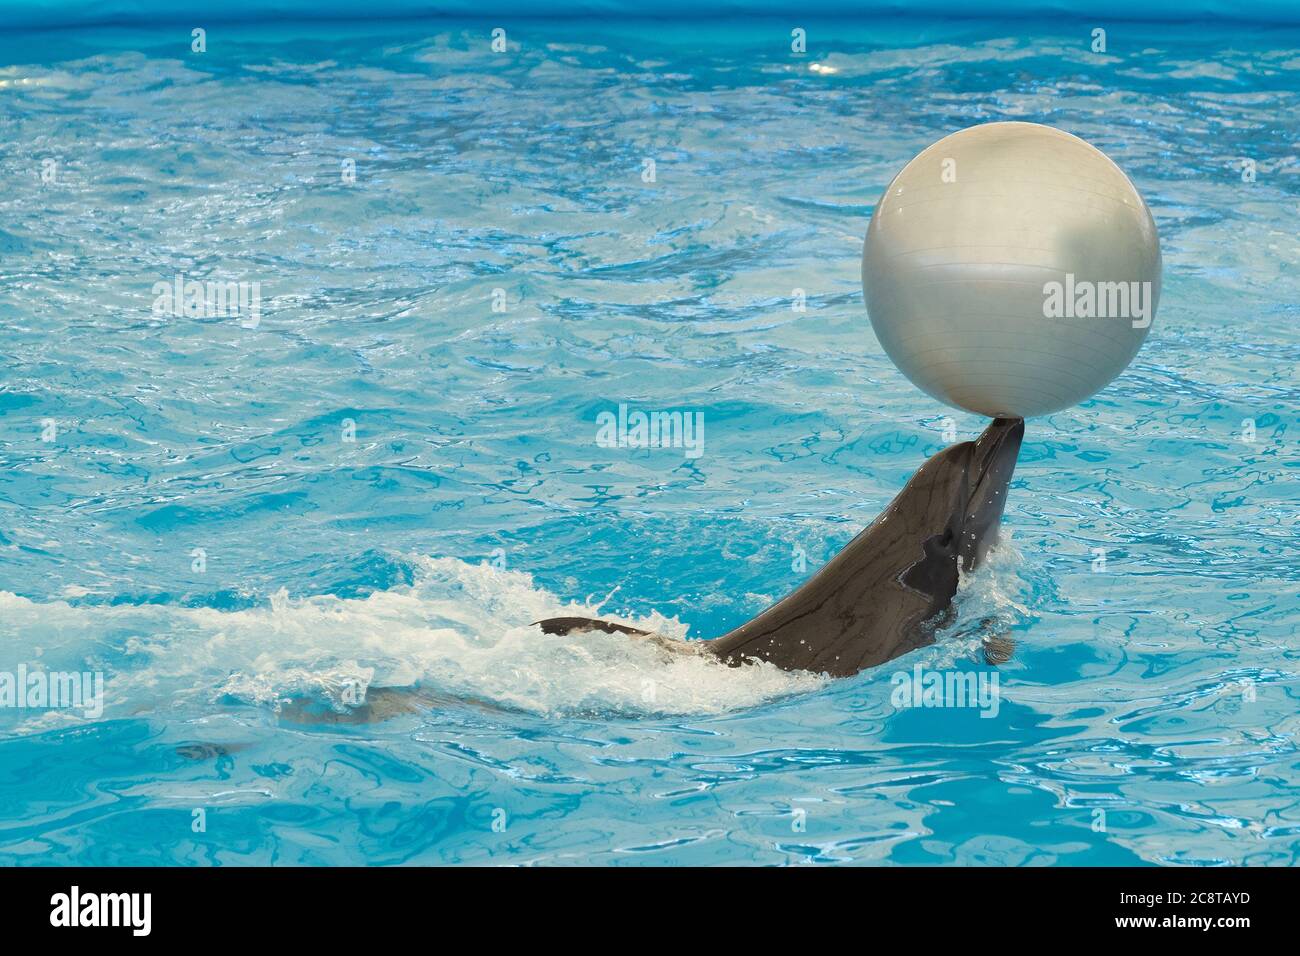 Bottlenose dolphin with ball during performance in water pool. Stock Photo